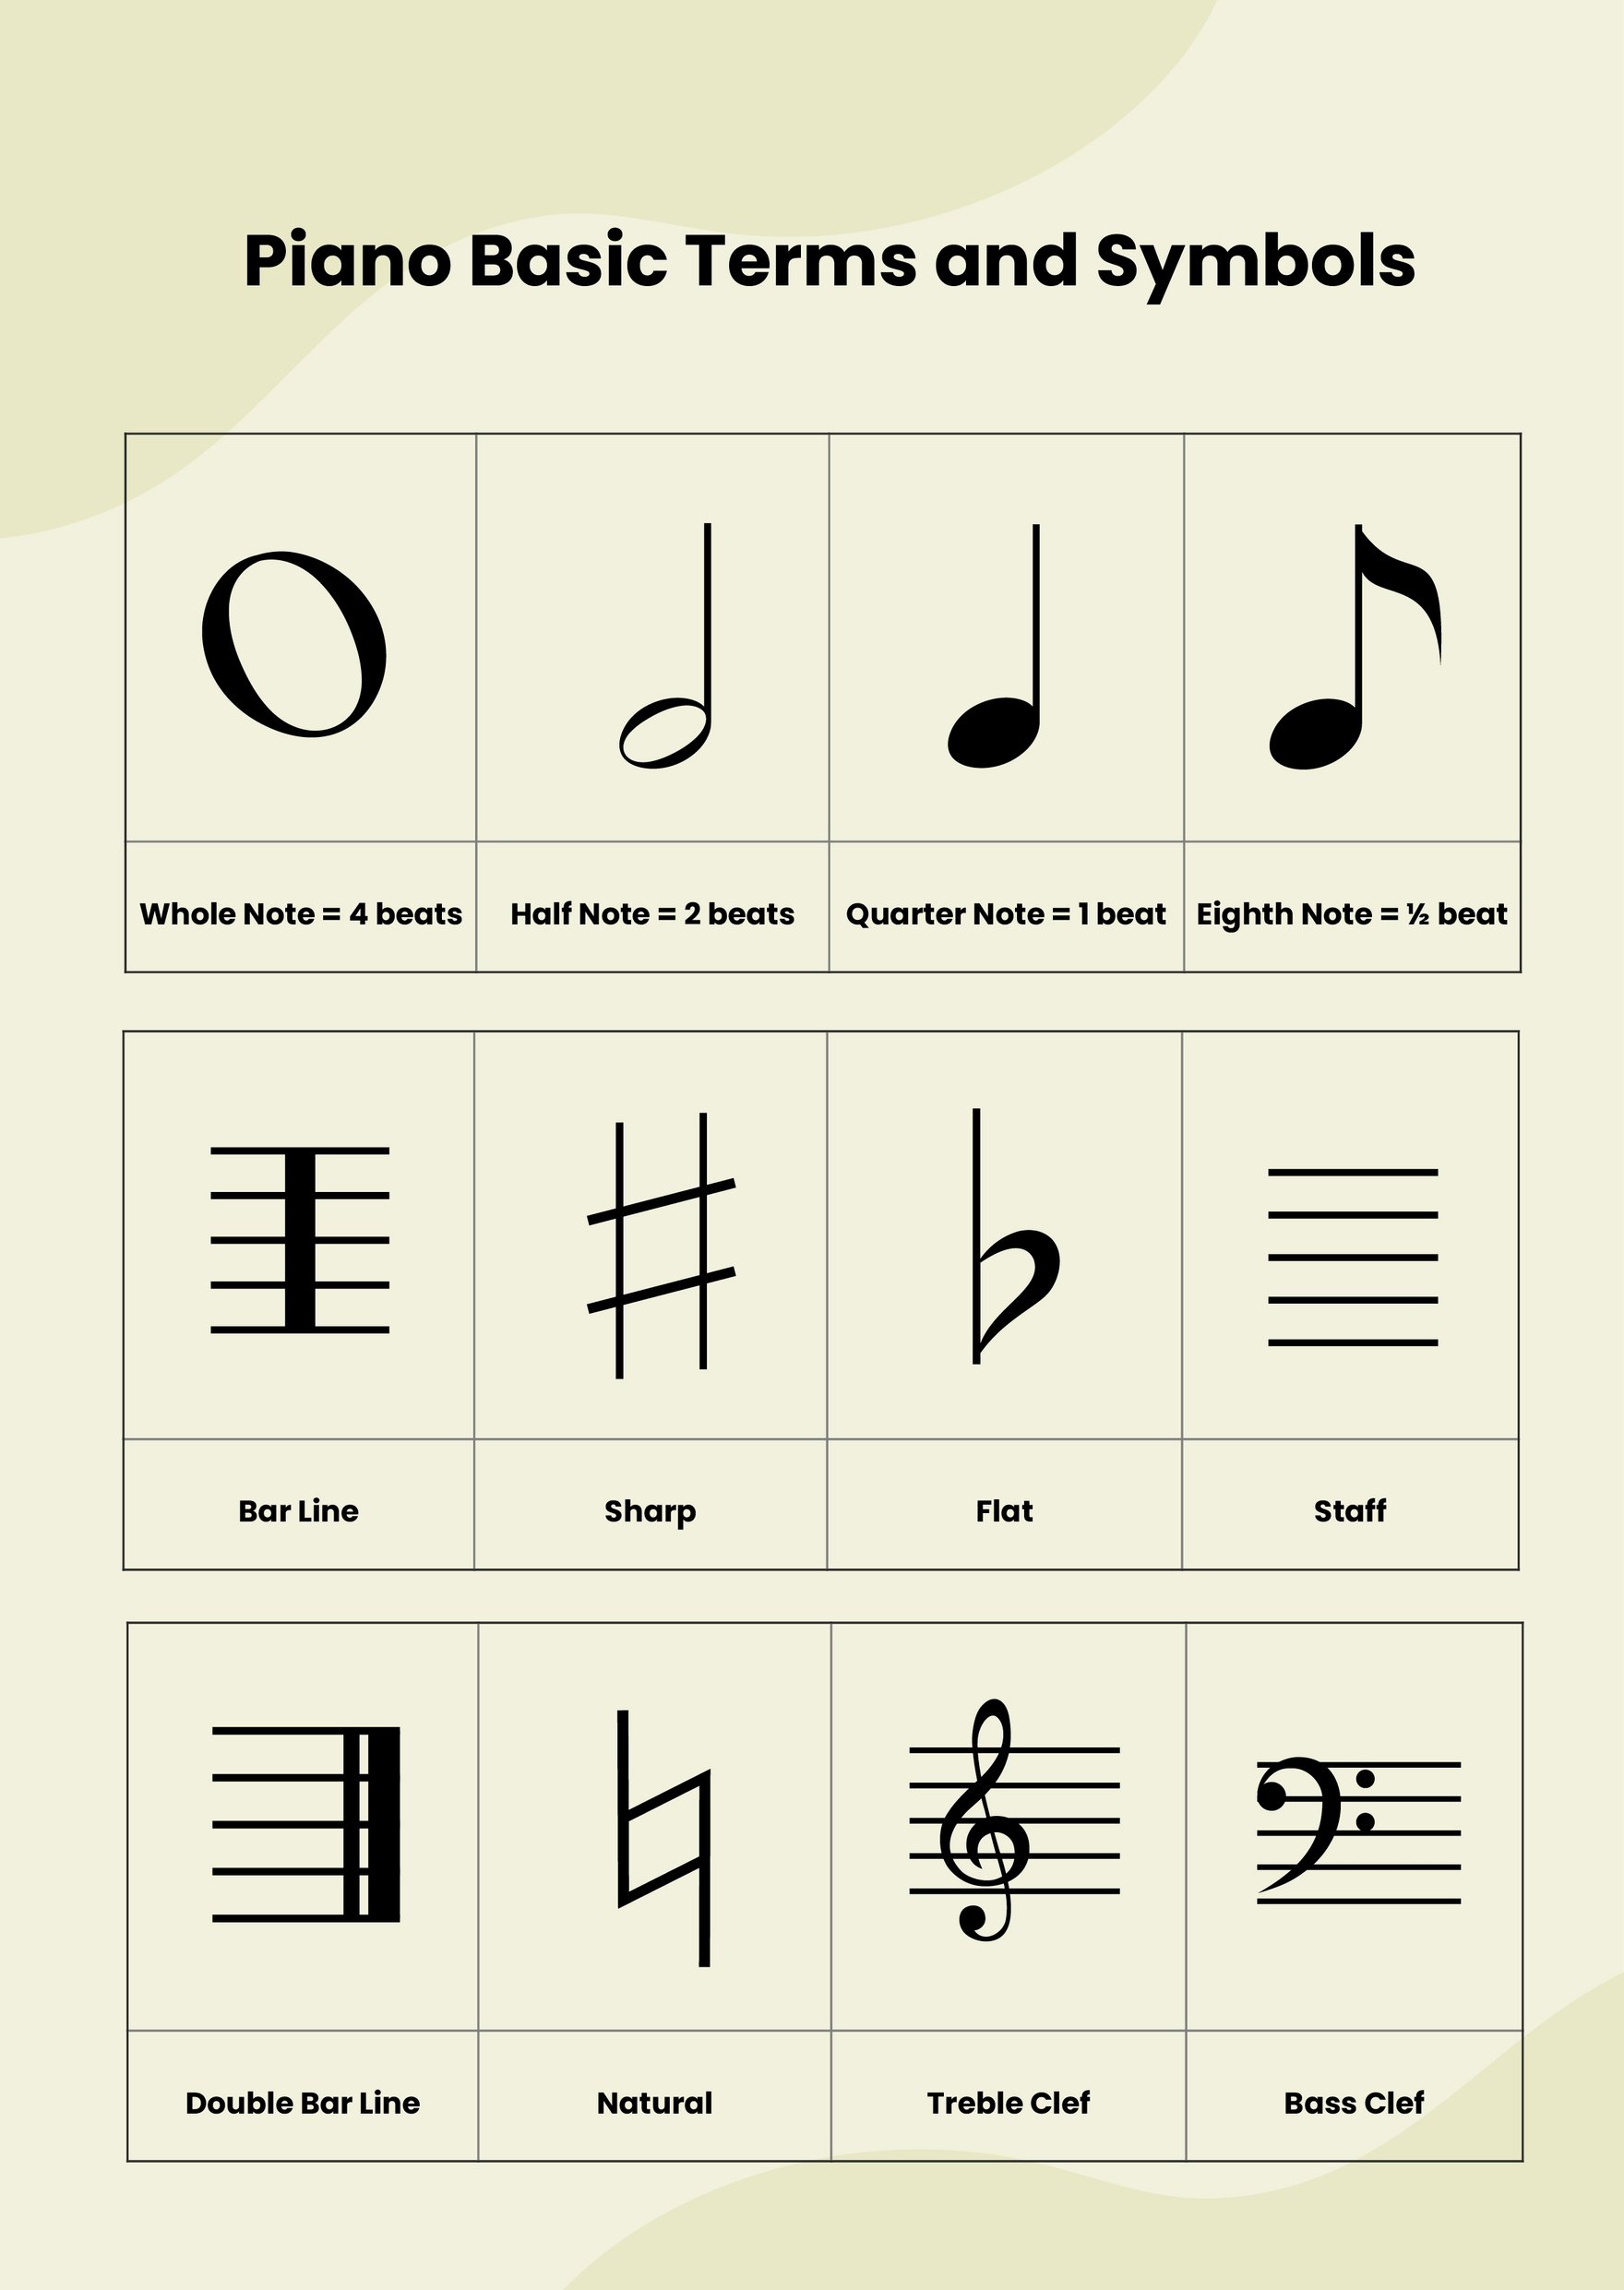 Piano Music Theory Notes Chart in Illustrator, PDF Download